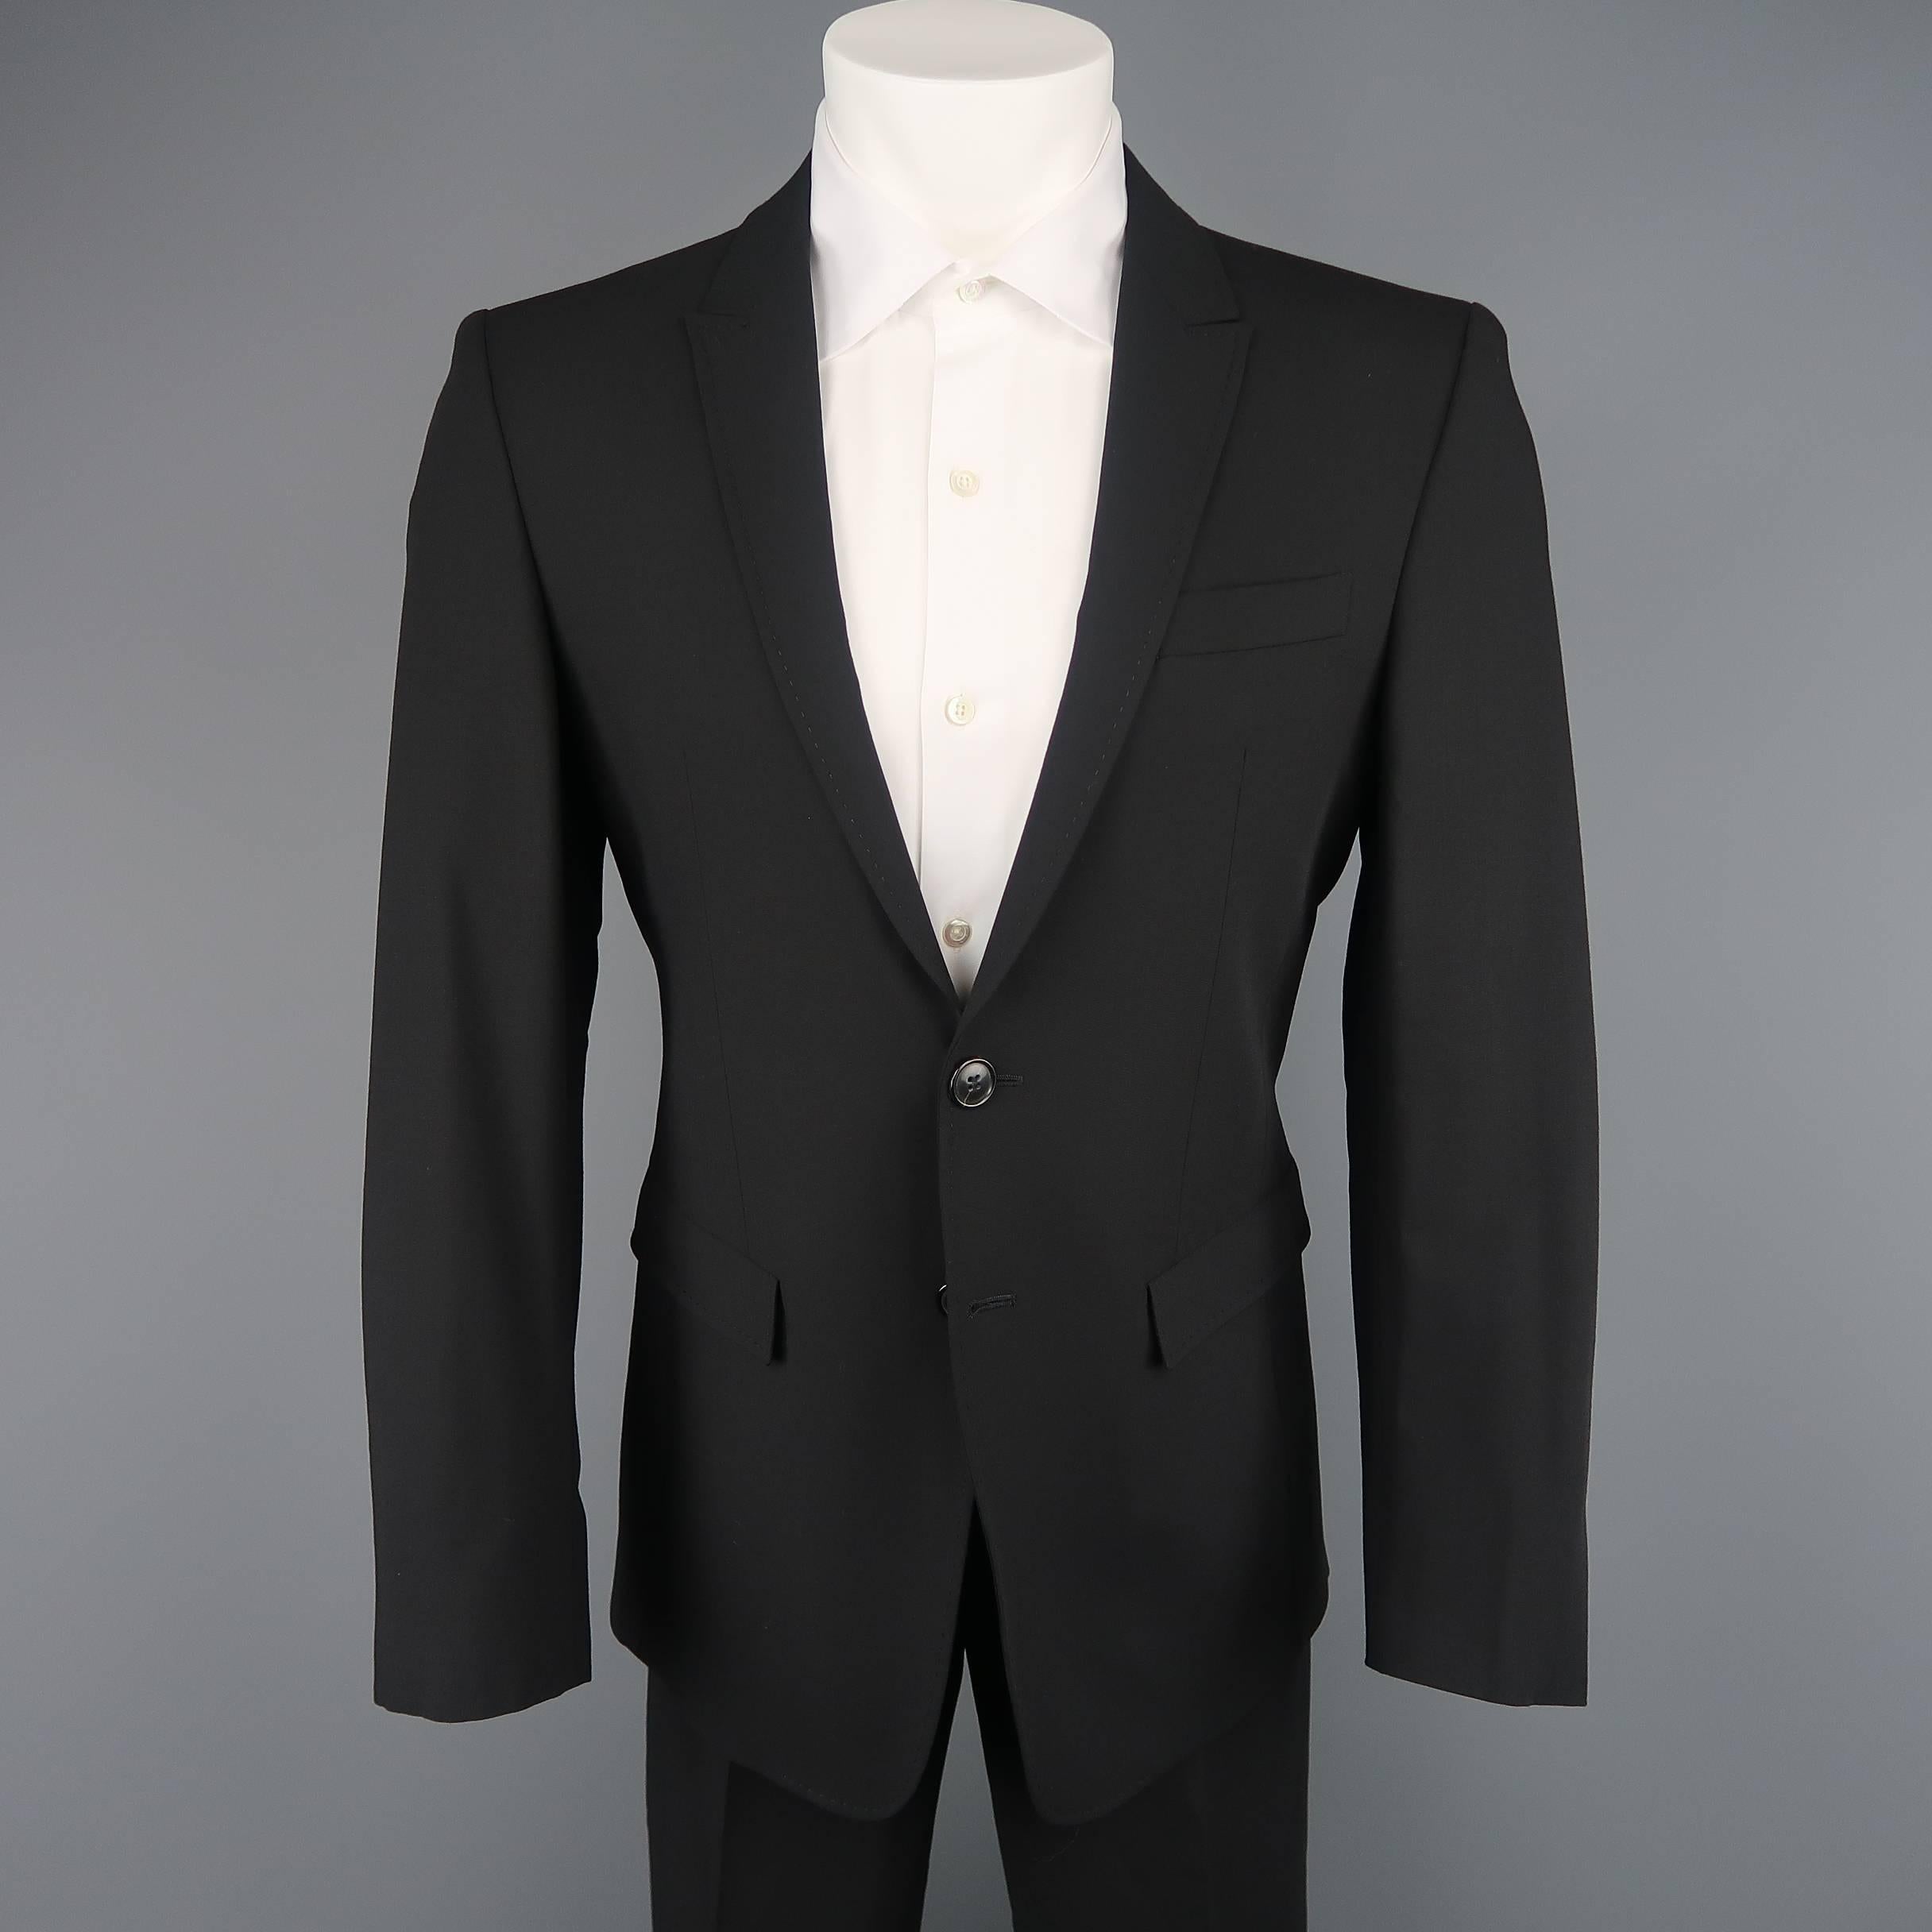 Two piece suit by EMPORIO ARMANI- ITALIA LINE comes in black wool and includes a single breasted two button sport coat with peak lapel and matching flat front trousers.  Made in Italy.
 
Excellent Pre-Owned Condition.
Marked: 40
 
Measurements:
